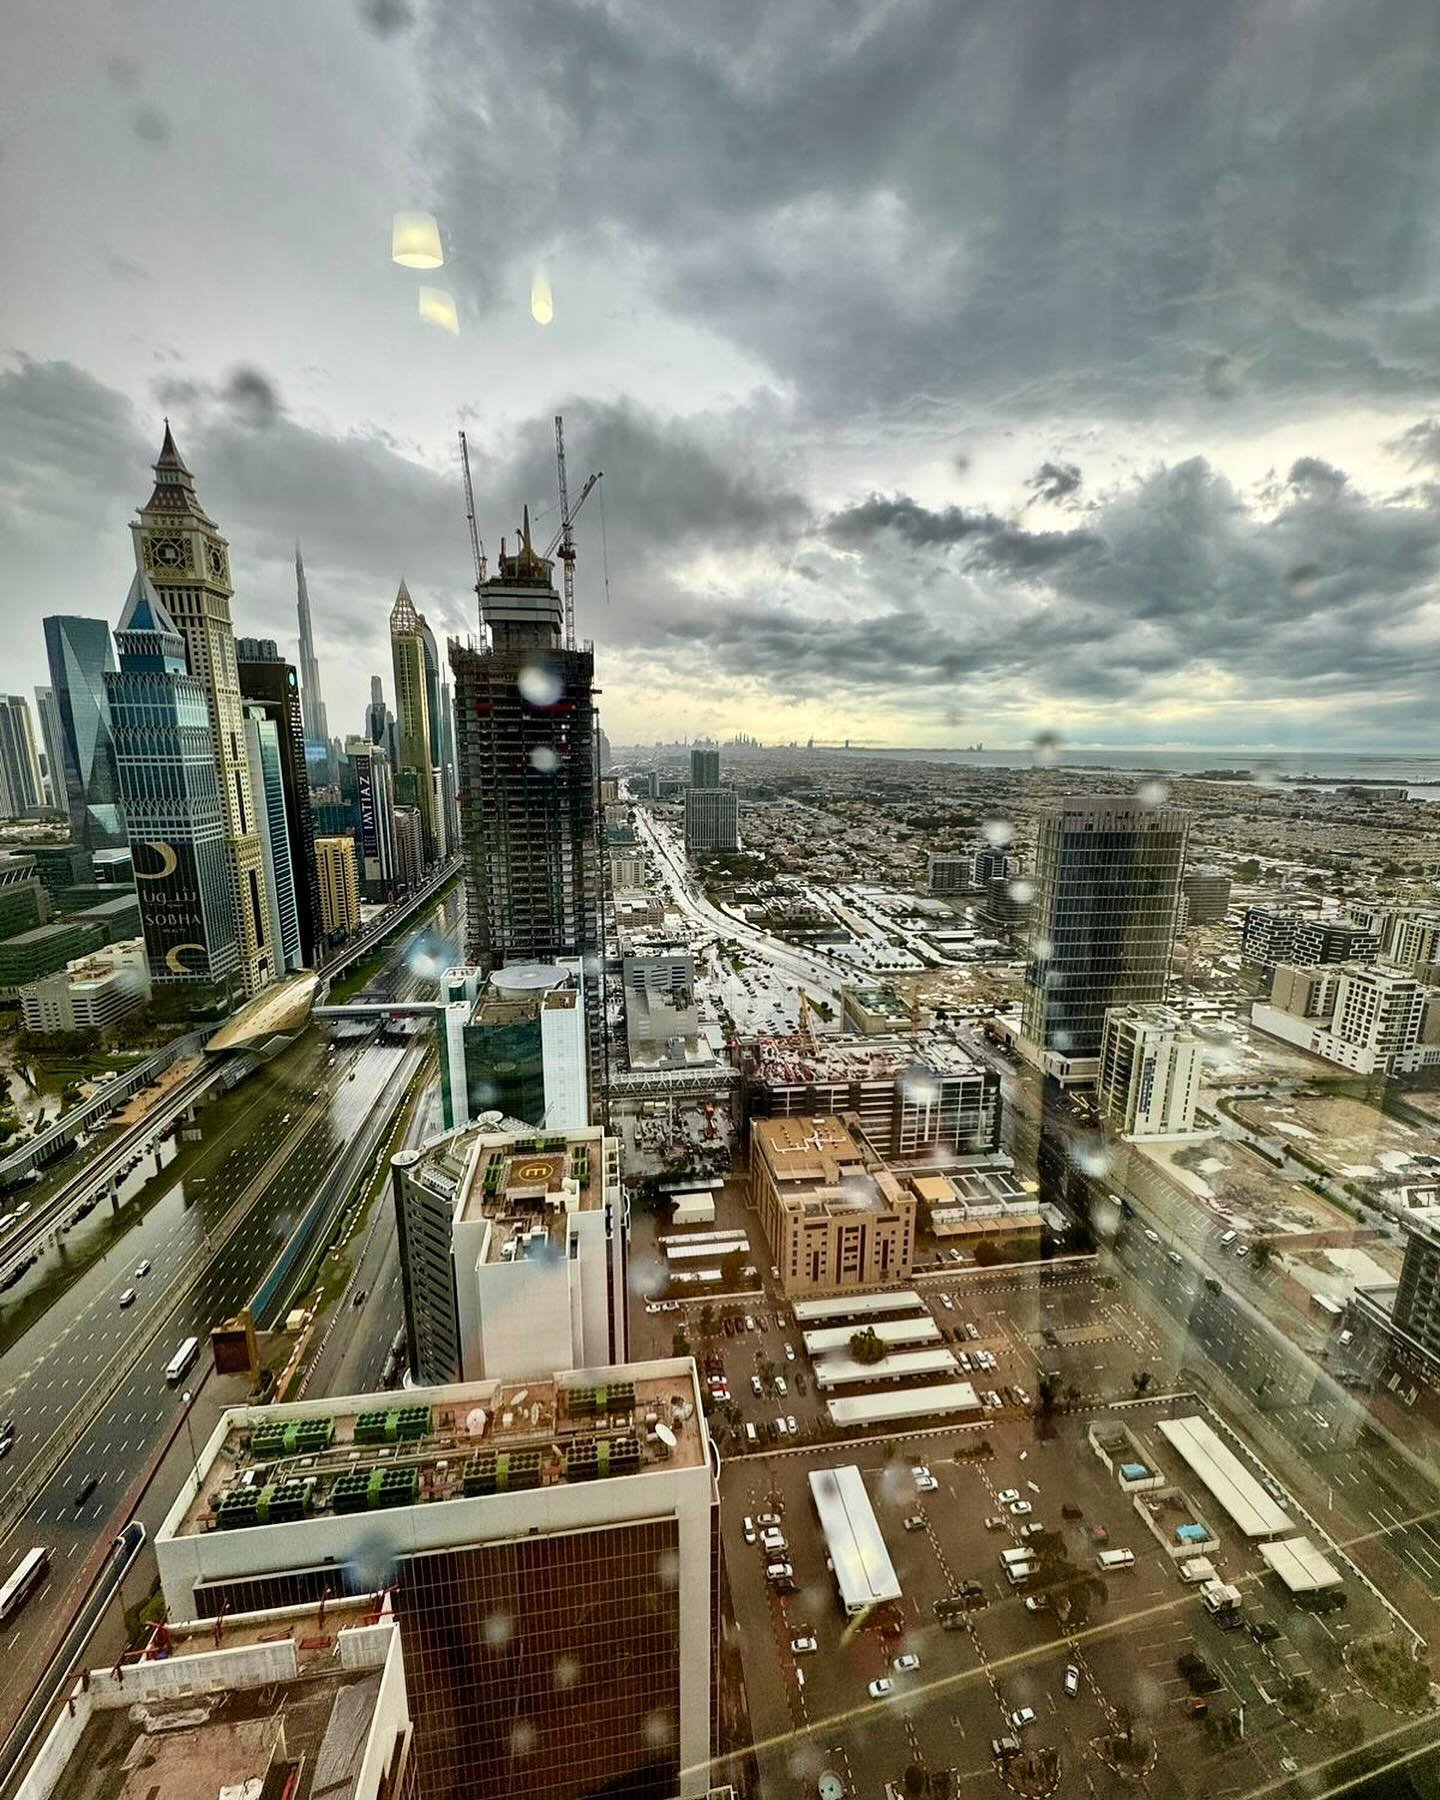 It&rsquo;s hard to believe that just 6 days ago UAE was being pelted with the biggest storm most of us have seen in these parts.  Chemical grey skies, horizontal rain, roaring thunder and constant flashes of lightening.  To those who are still experi